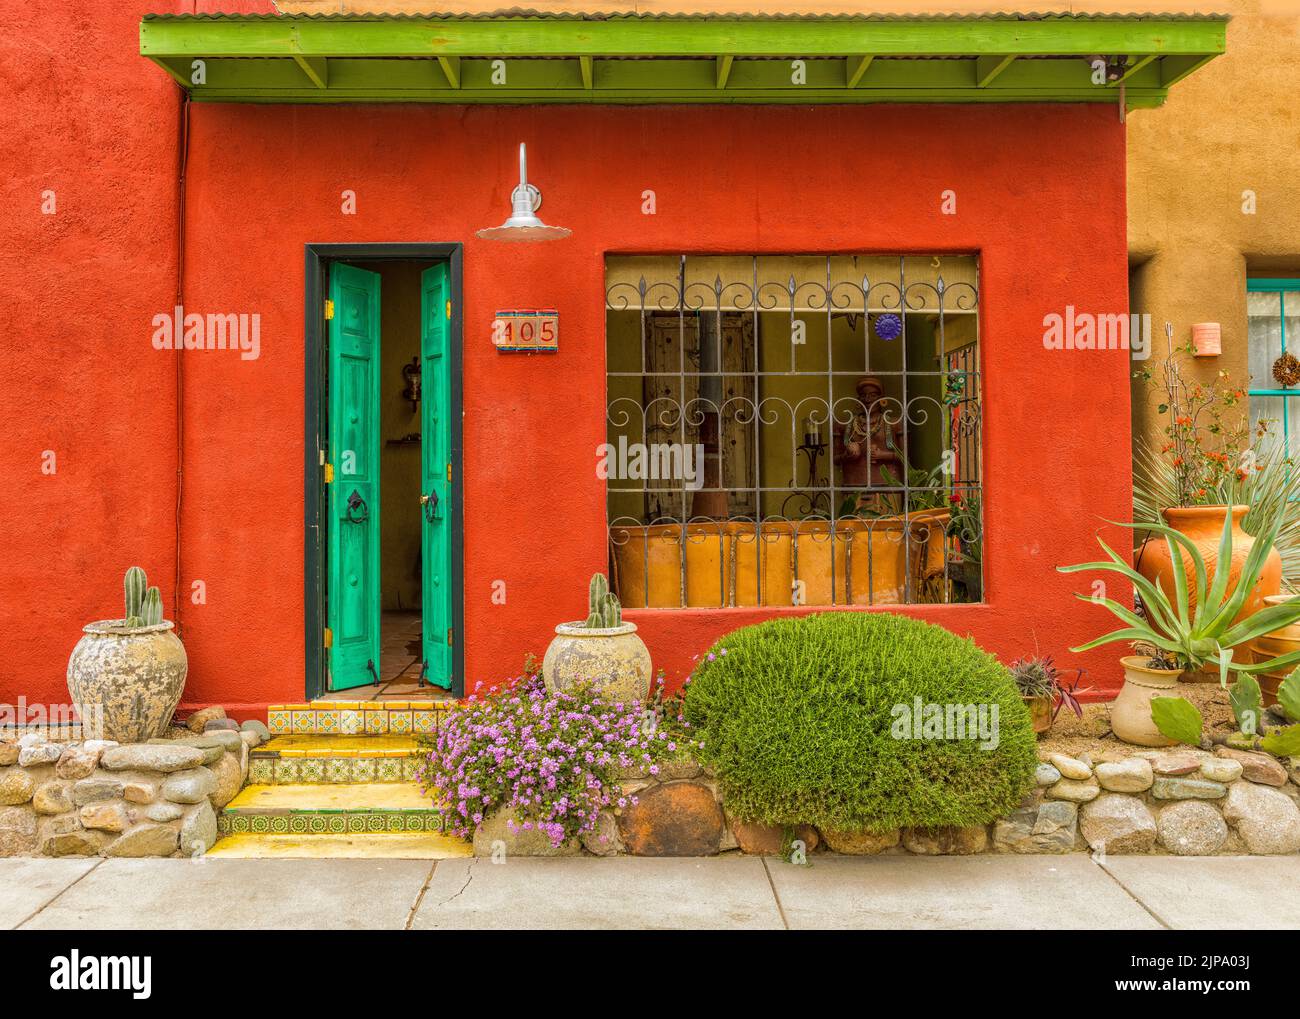 Colorful walls and Windows Adobe Stryle,Old Town,Artist District, Adobe Walls Tucson,Arizona, United States,USA Stock Photo